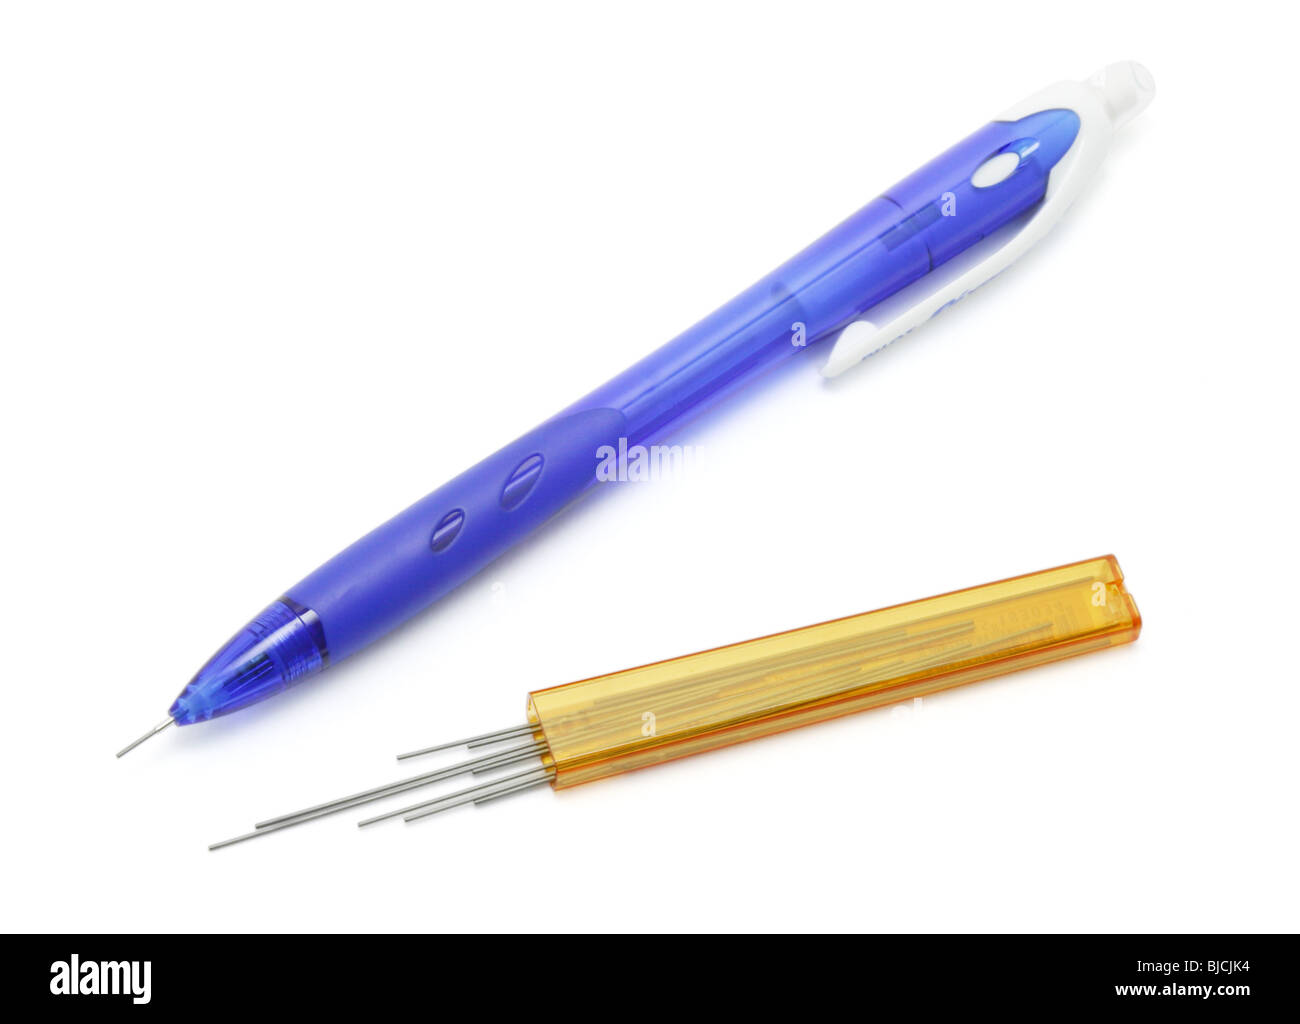 Mechanical pencil and leads on white background Stock Photo